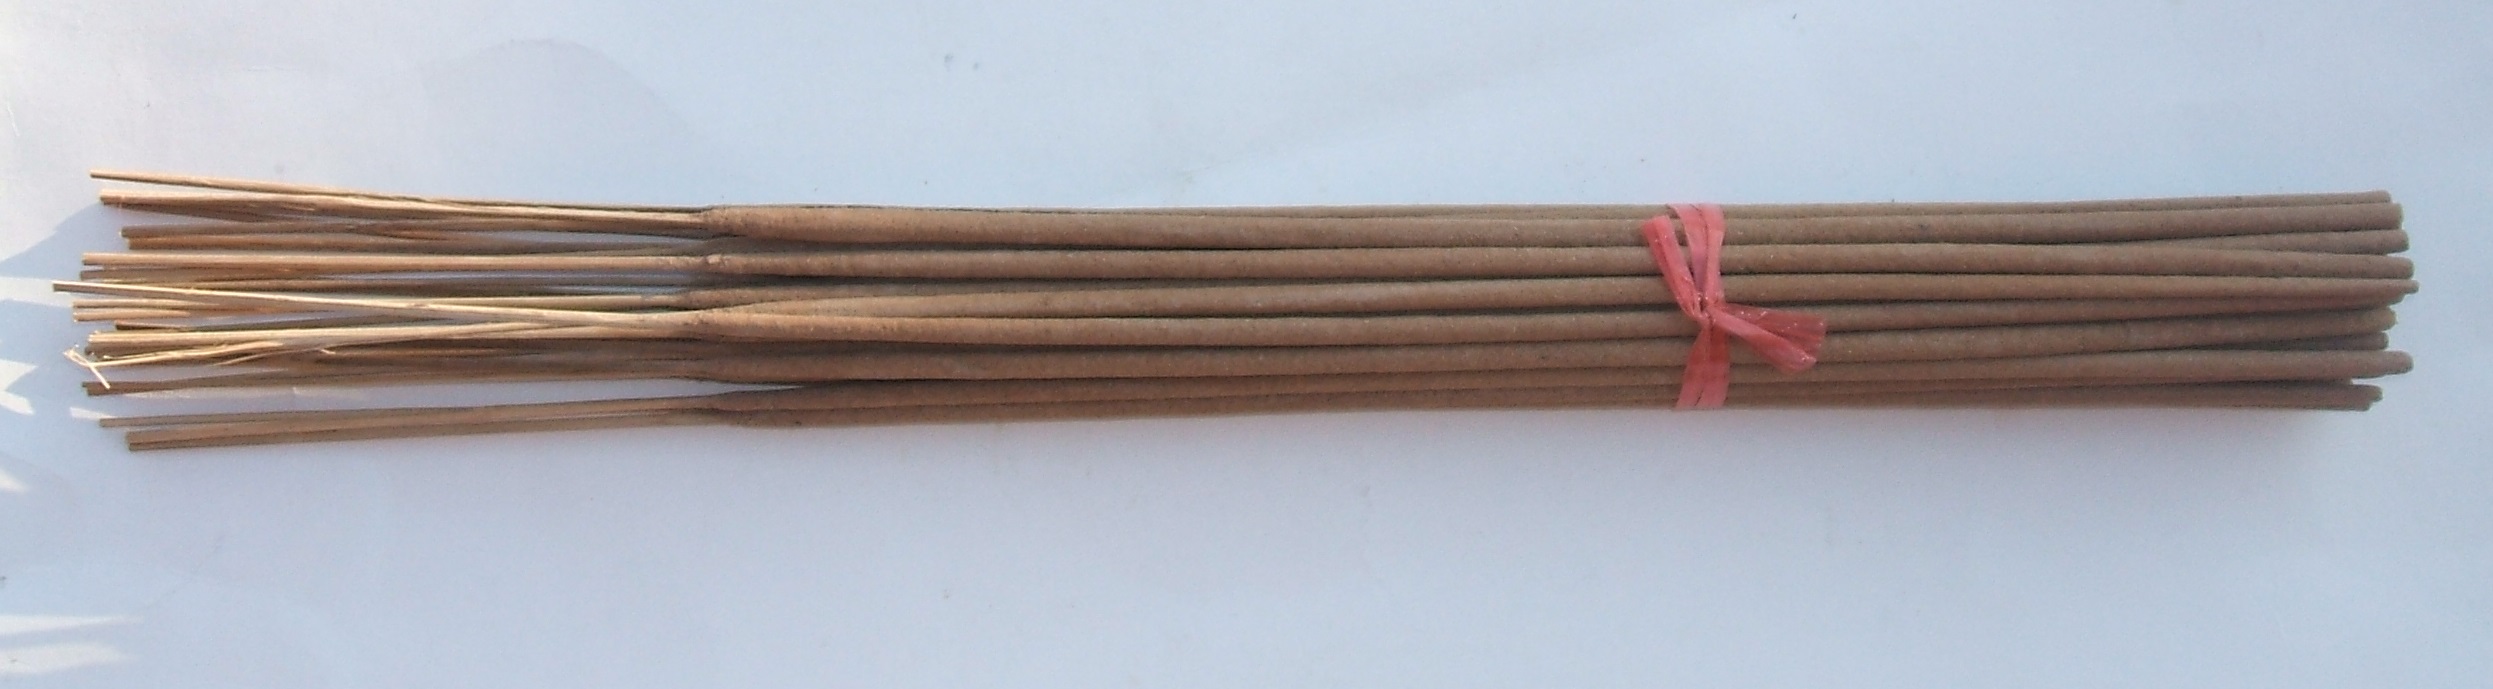 Incense Sticks - Value Pack  ii438 » Alhannah Islamic Clothing